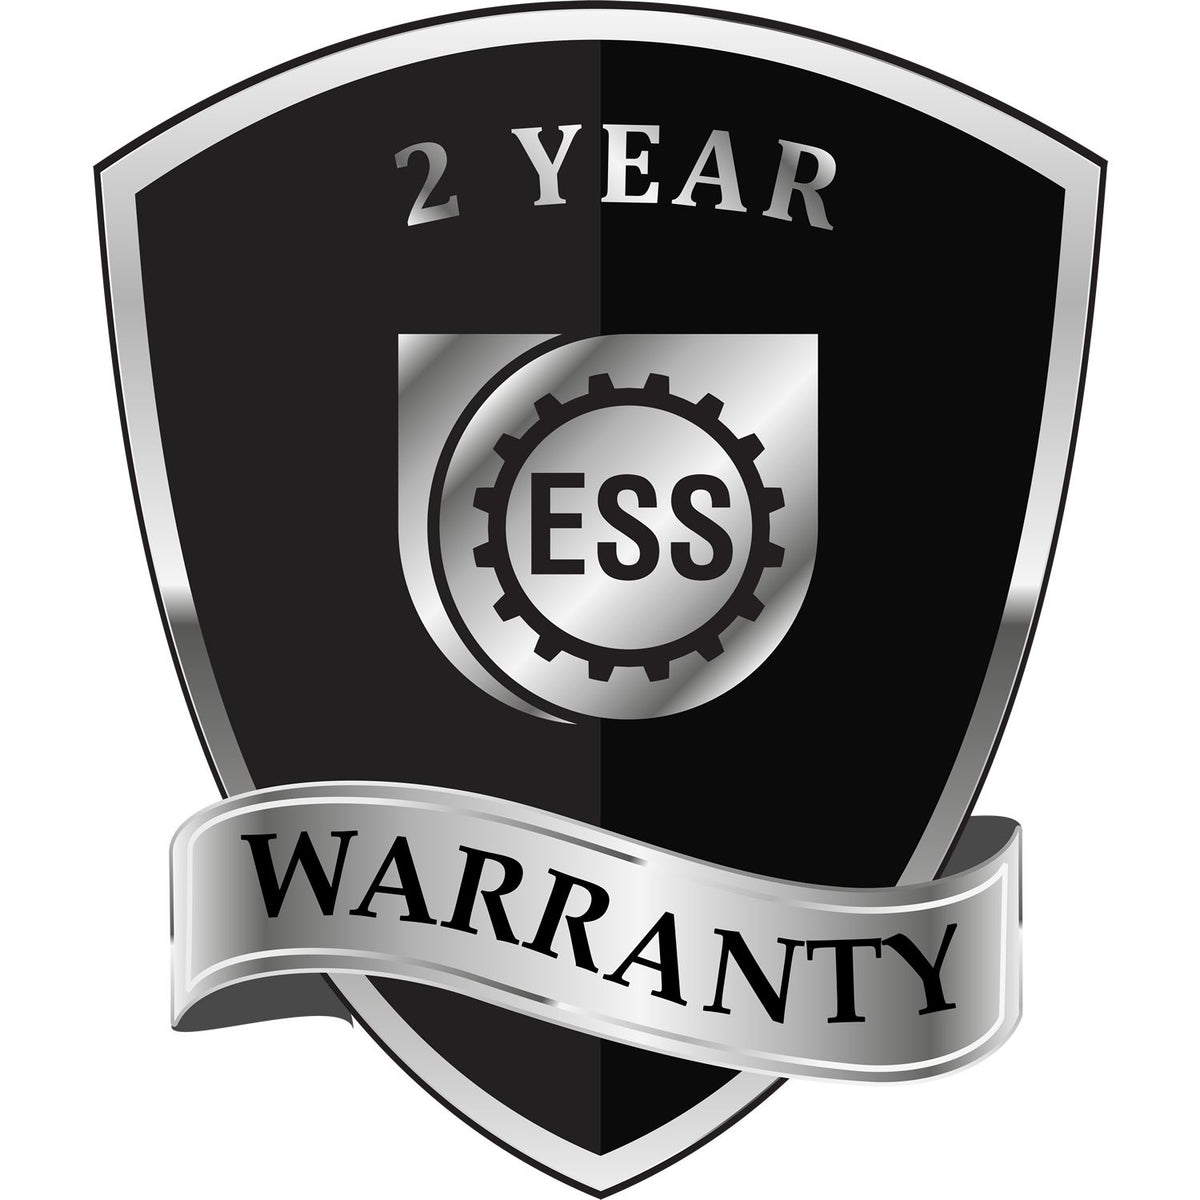 A black and silver badge or emblem showing warranty information for the Gift Connecticut Landscape Architect Seal